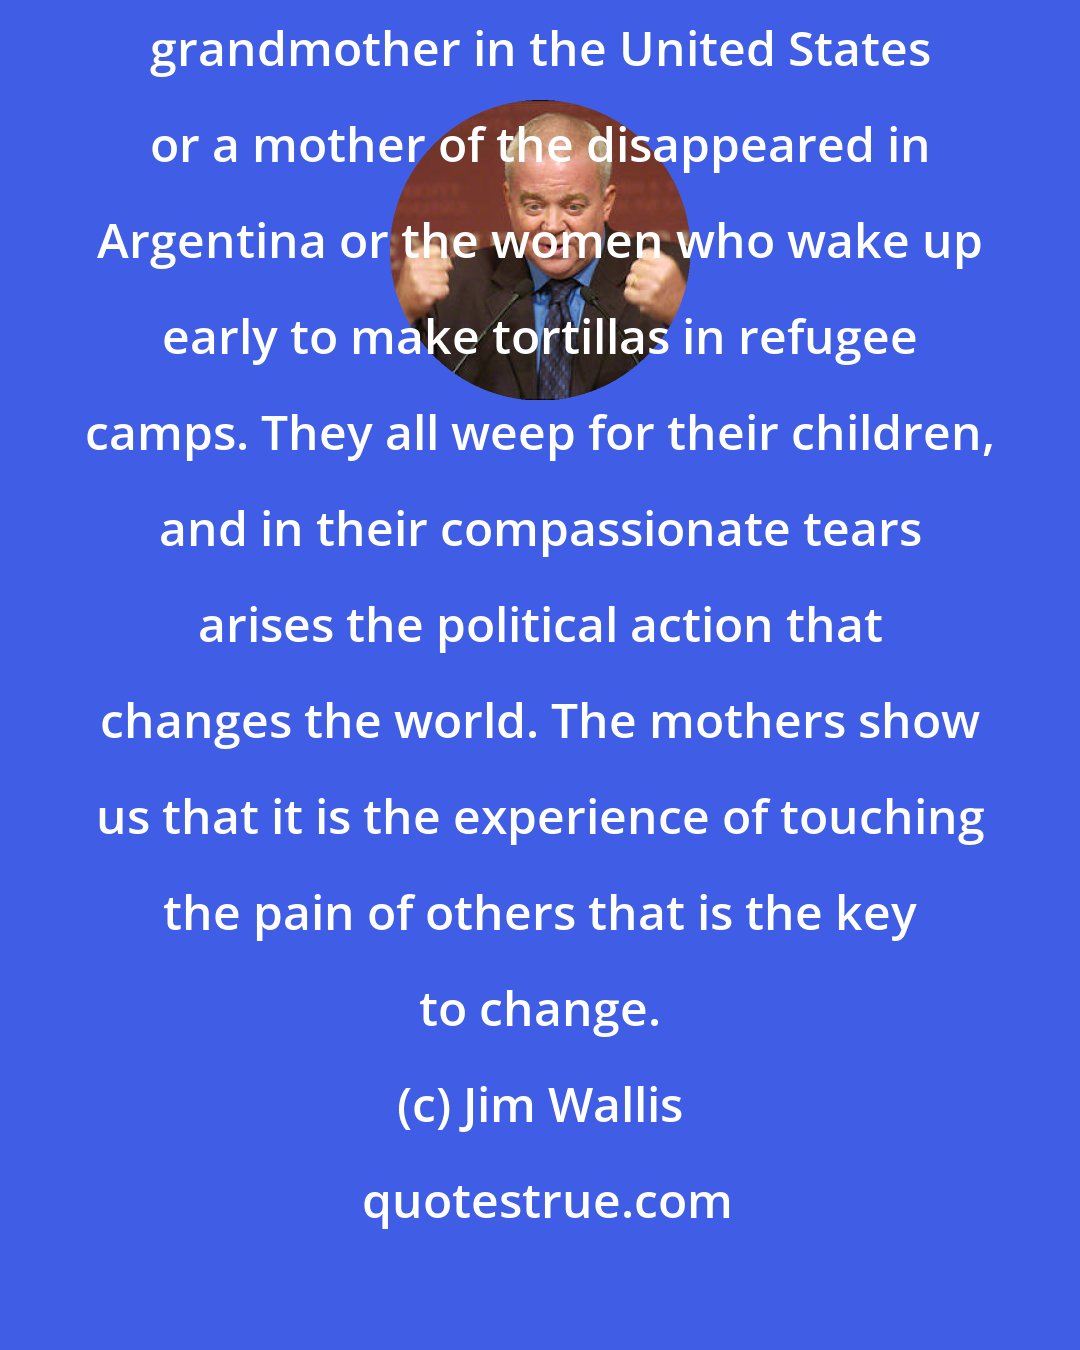 Jim Wallis: At times I think the truest image of God today is a black inner-city grandmother in the United States or a mother of the disappeared in Argentina or the women who wake up early to make tortillas in refugee camps. They all weep for their children, and in their compassionate tears arises the political action that changes the world. The mothers show us that it is the experience of touching the pain of others that is the key to change.